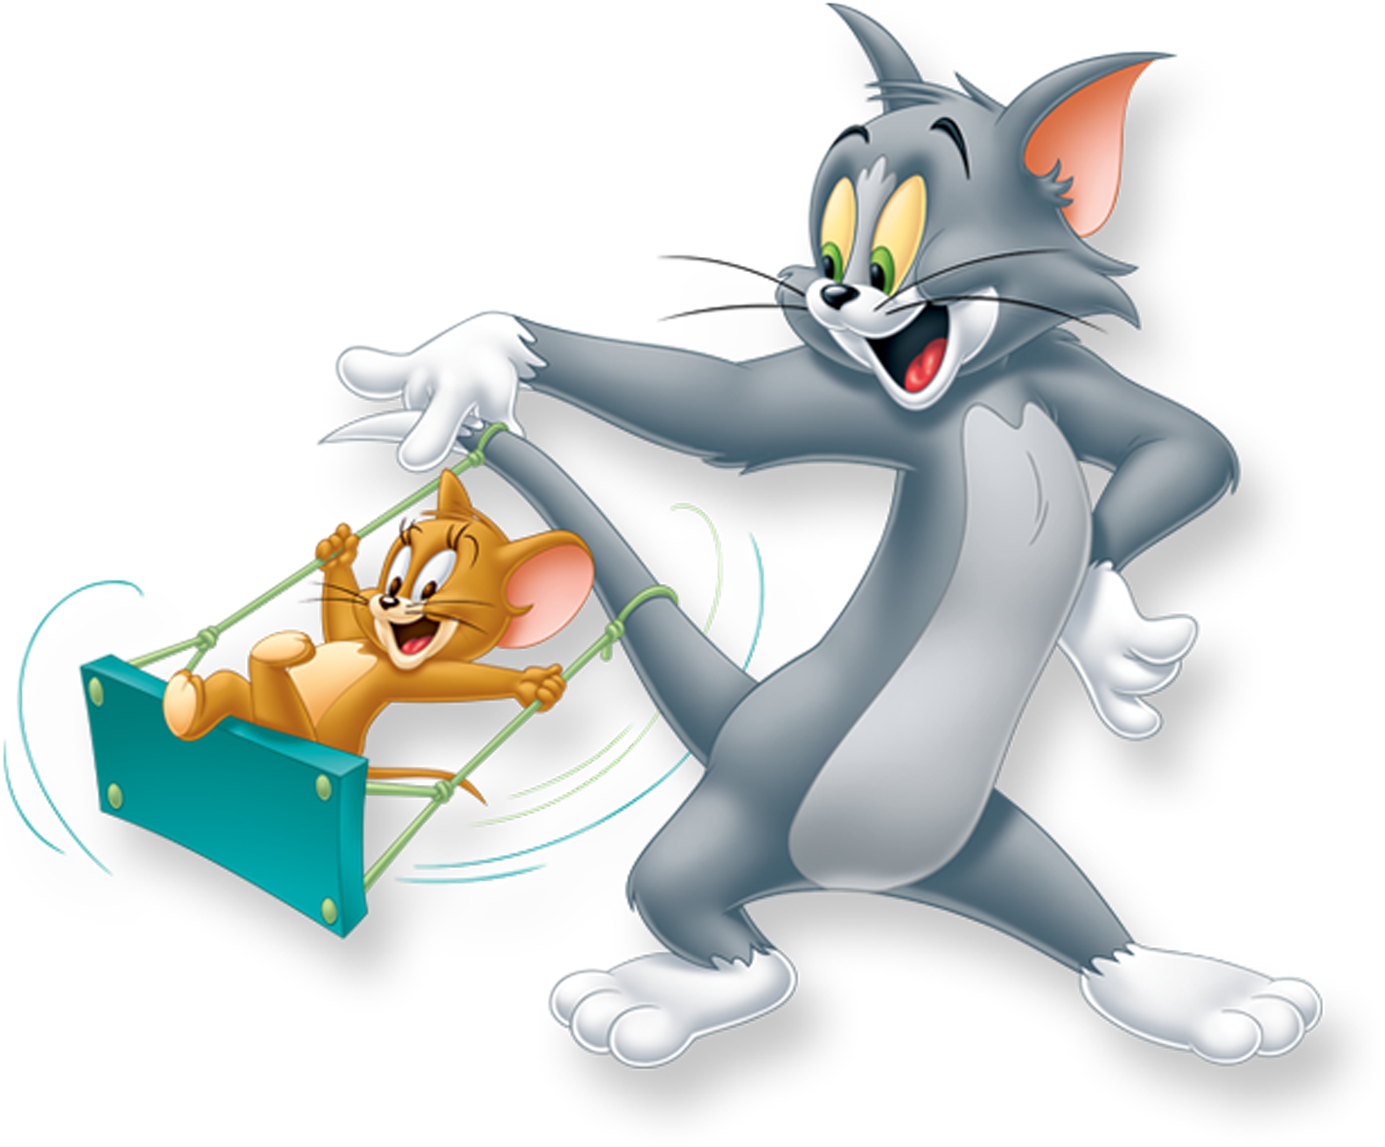 A Cartoon Cat Pulling A Mouse On A Swing